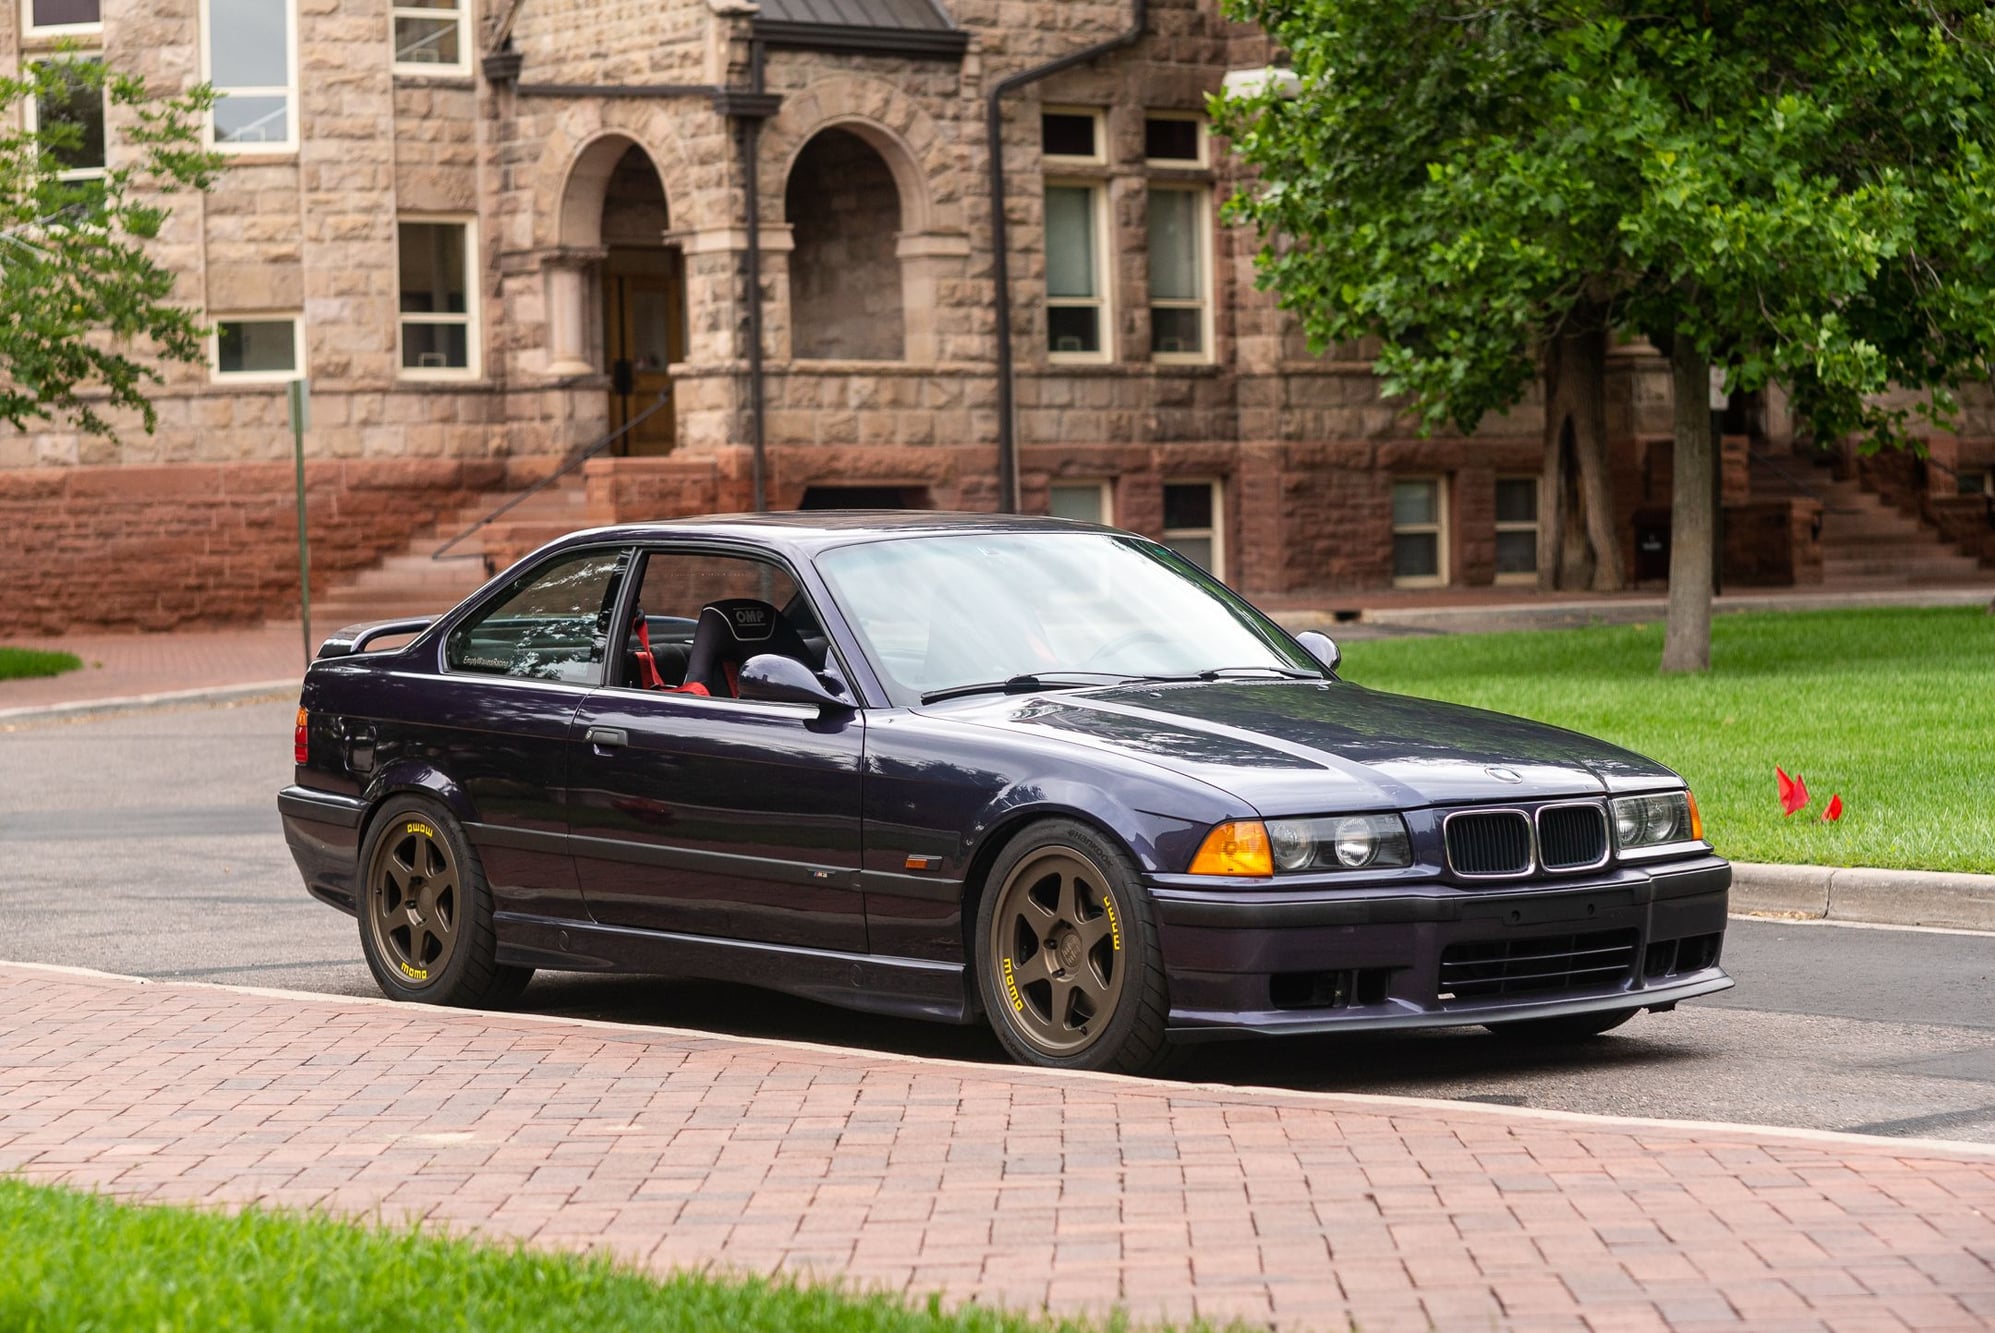 1996 BMW M3 - Ls1 5.7  t56 bmw m3 - Used - VIN WBSBG9327TEY73332 - 175,000 Miles - 8 cyl - 2WD - Manual - Coupe - Purple - Englewood, CO 80110, United States